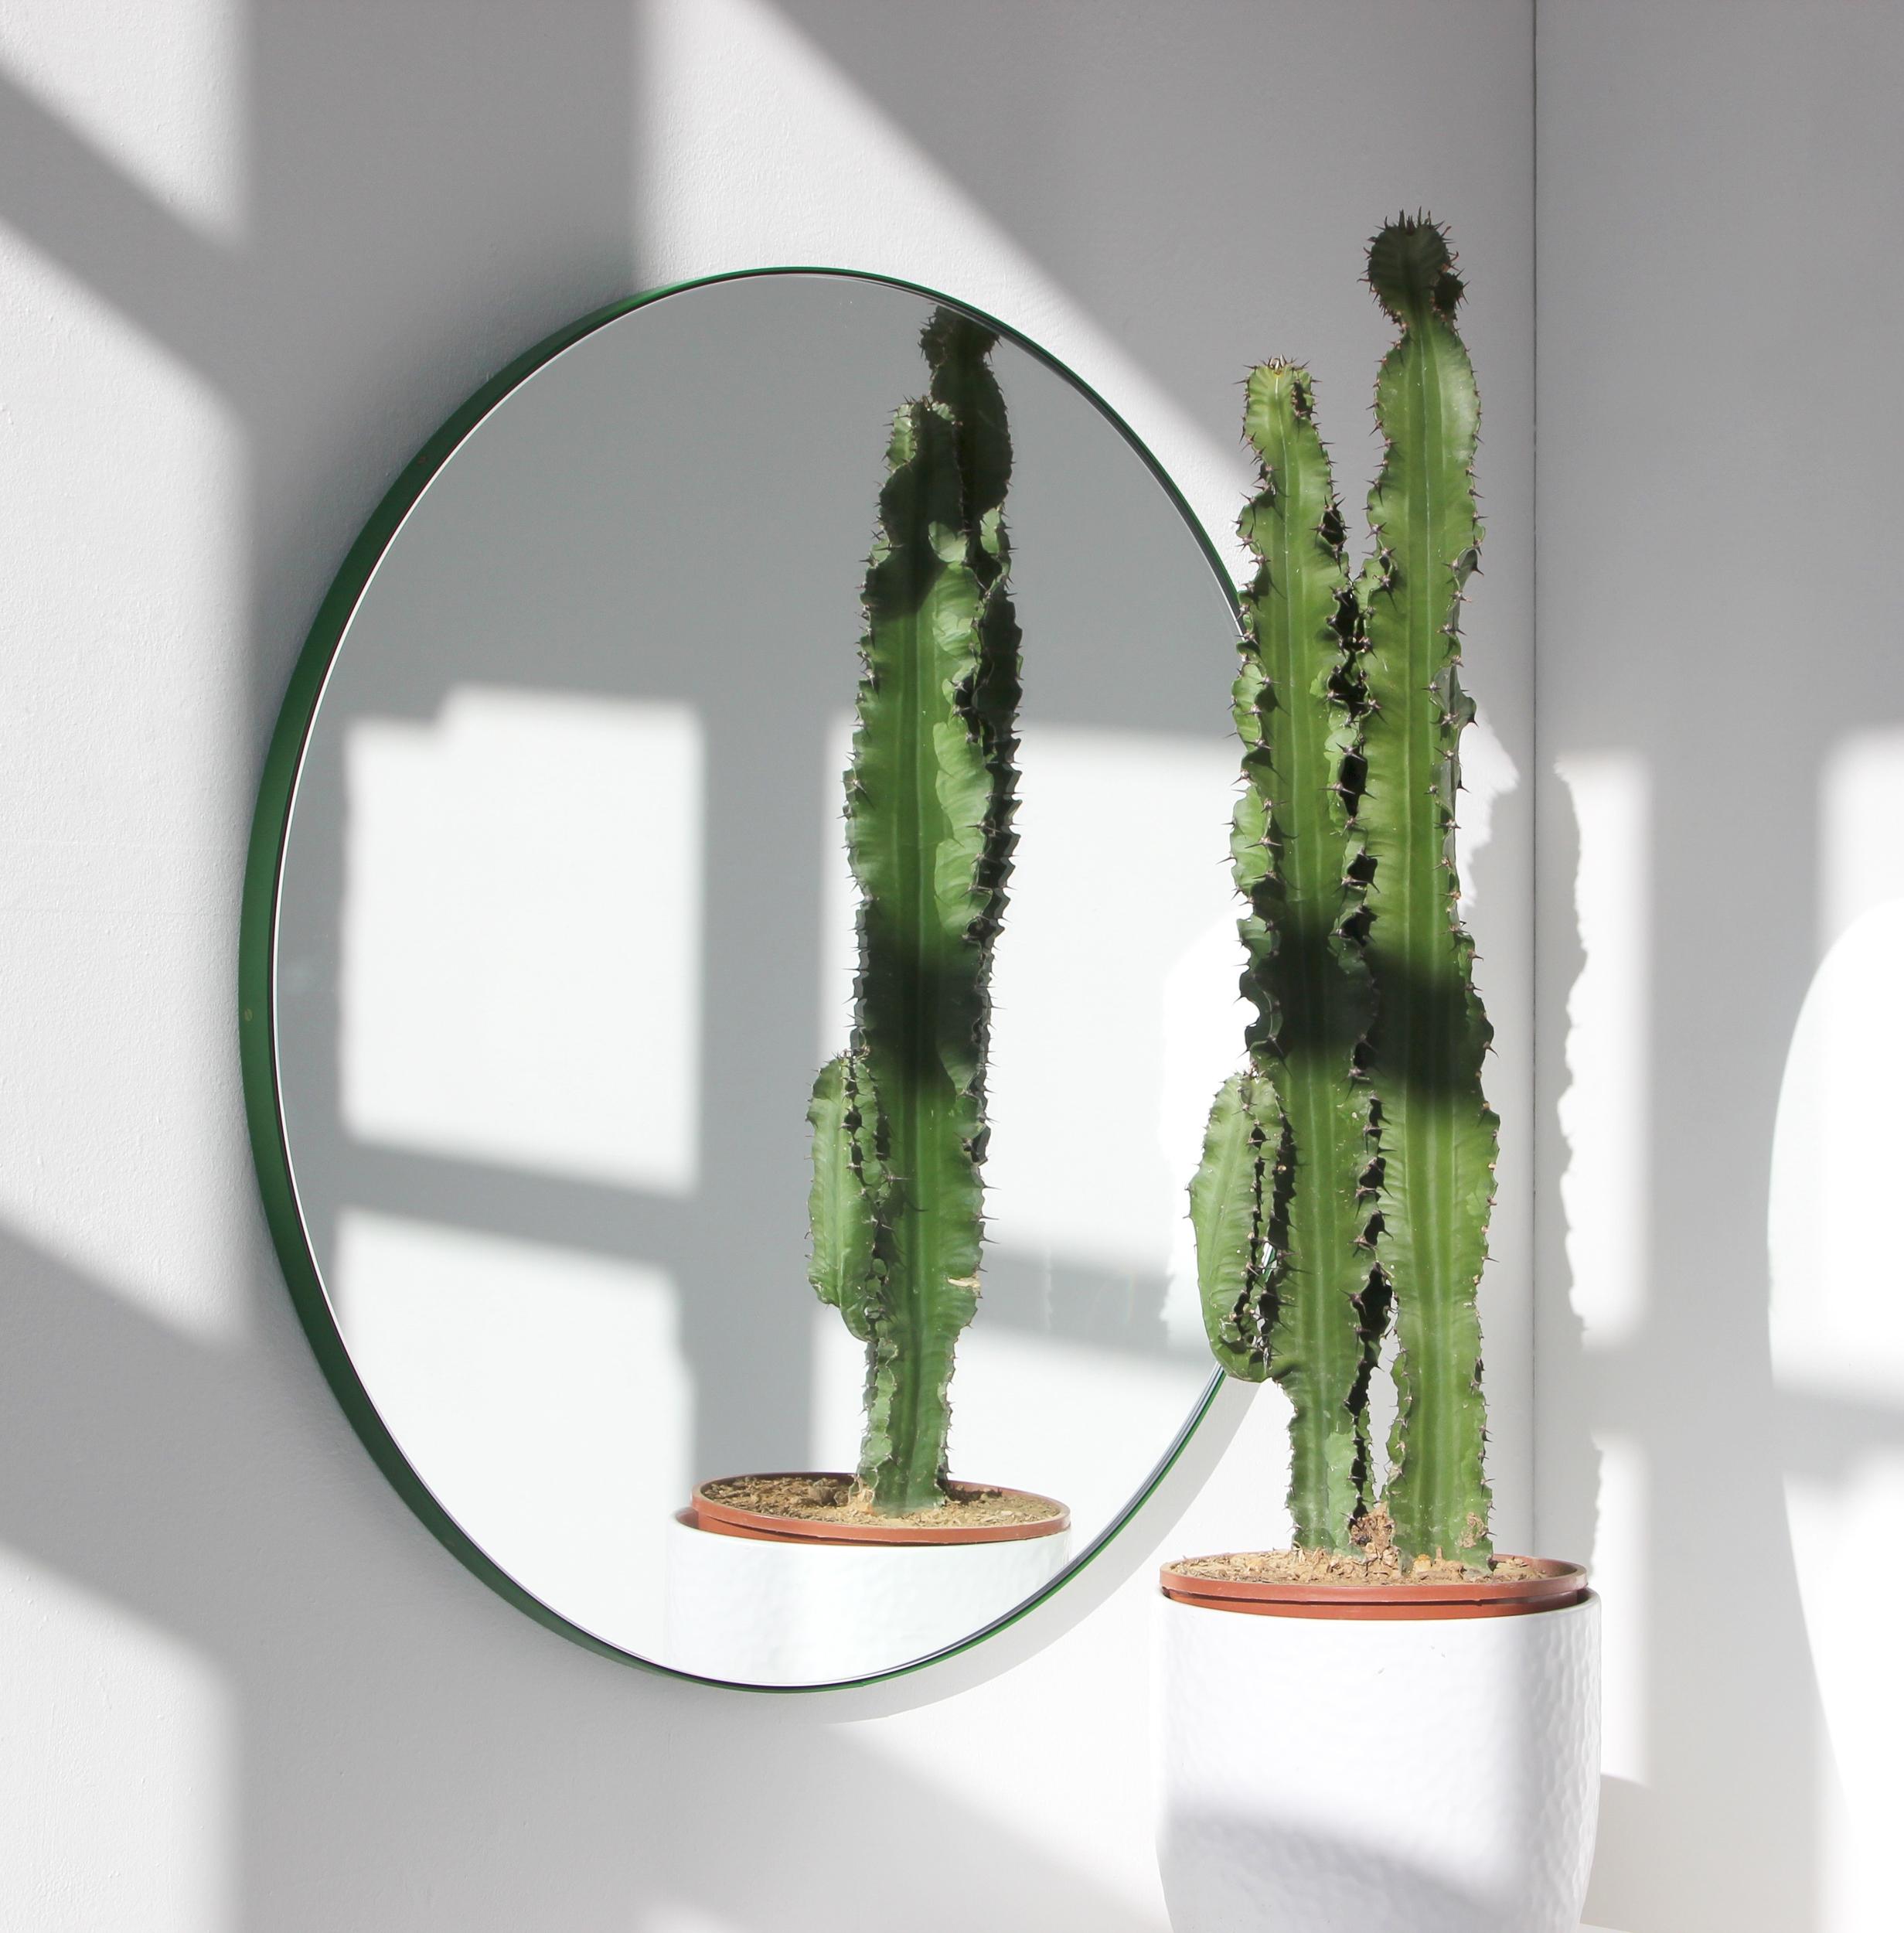 Minimalist round mirror with a lively aluminium powder coated green frame. Designed and handcrafted in London, UK.

Medium, large and extra-large mirrors (60, 80 and 100cm) are fitted with an ingenious French cleat (split batten) system so they may